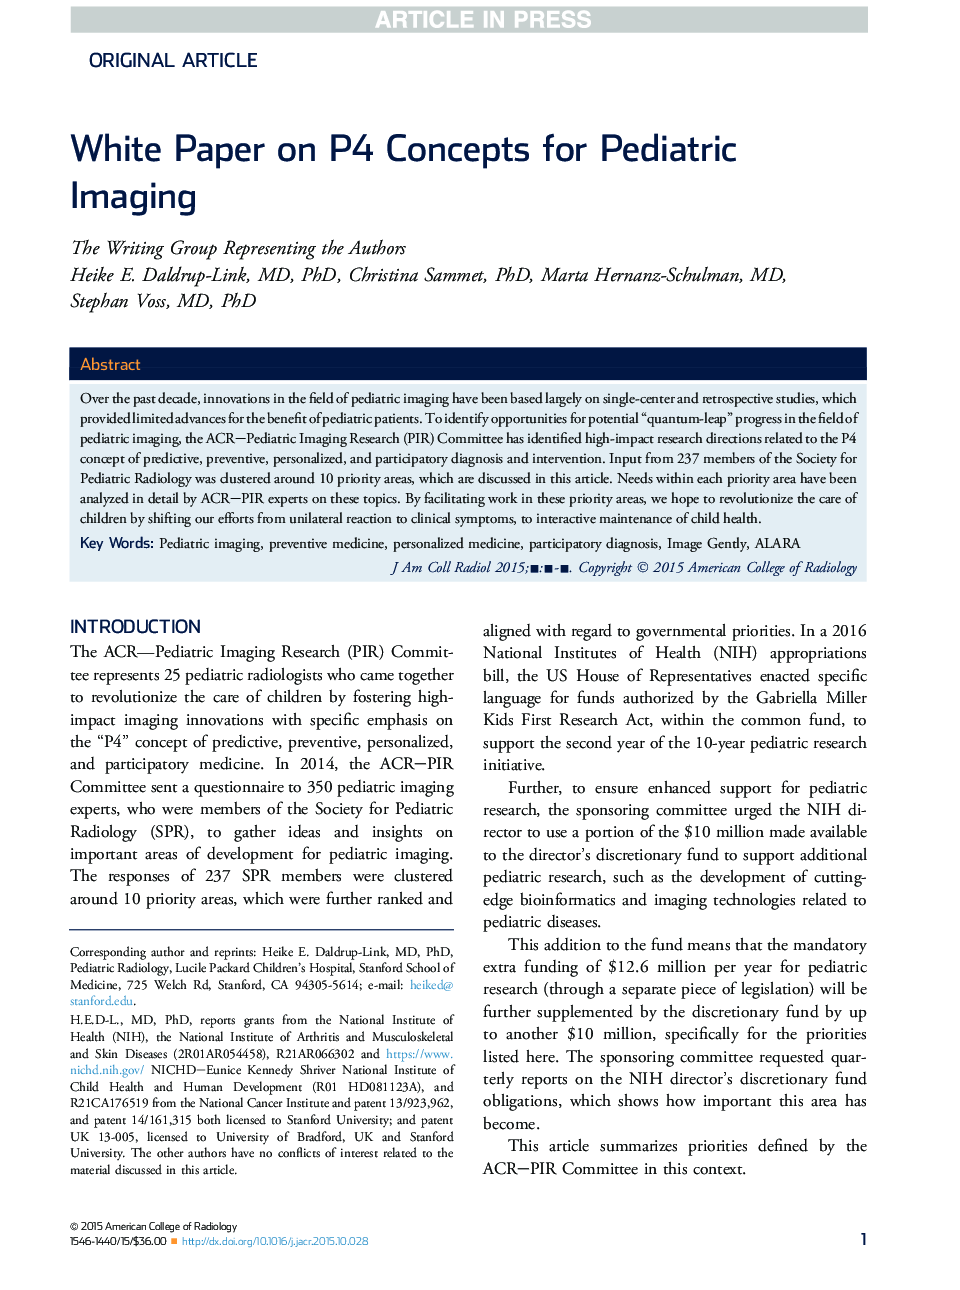 White Paper on P4 Concepts for Pediatric Imaging